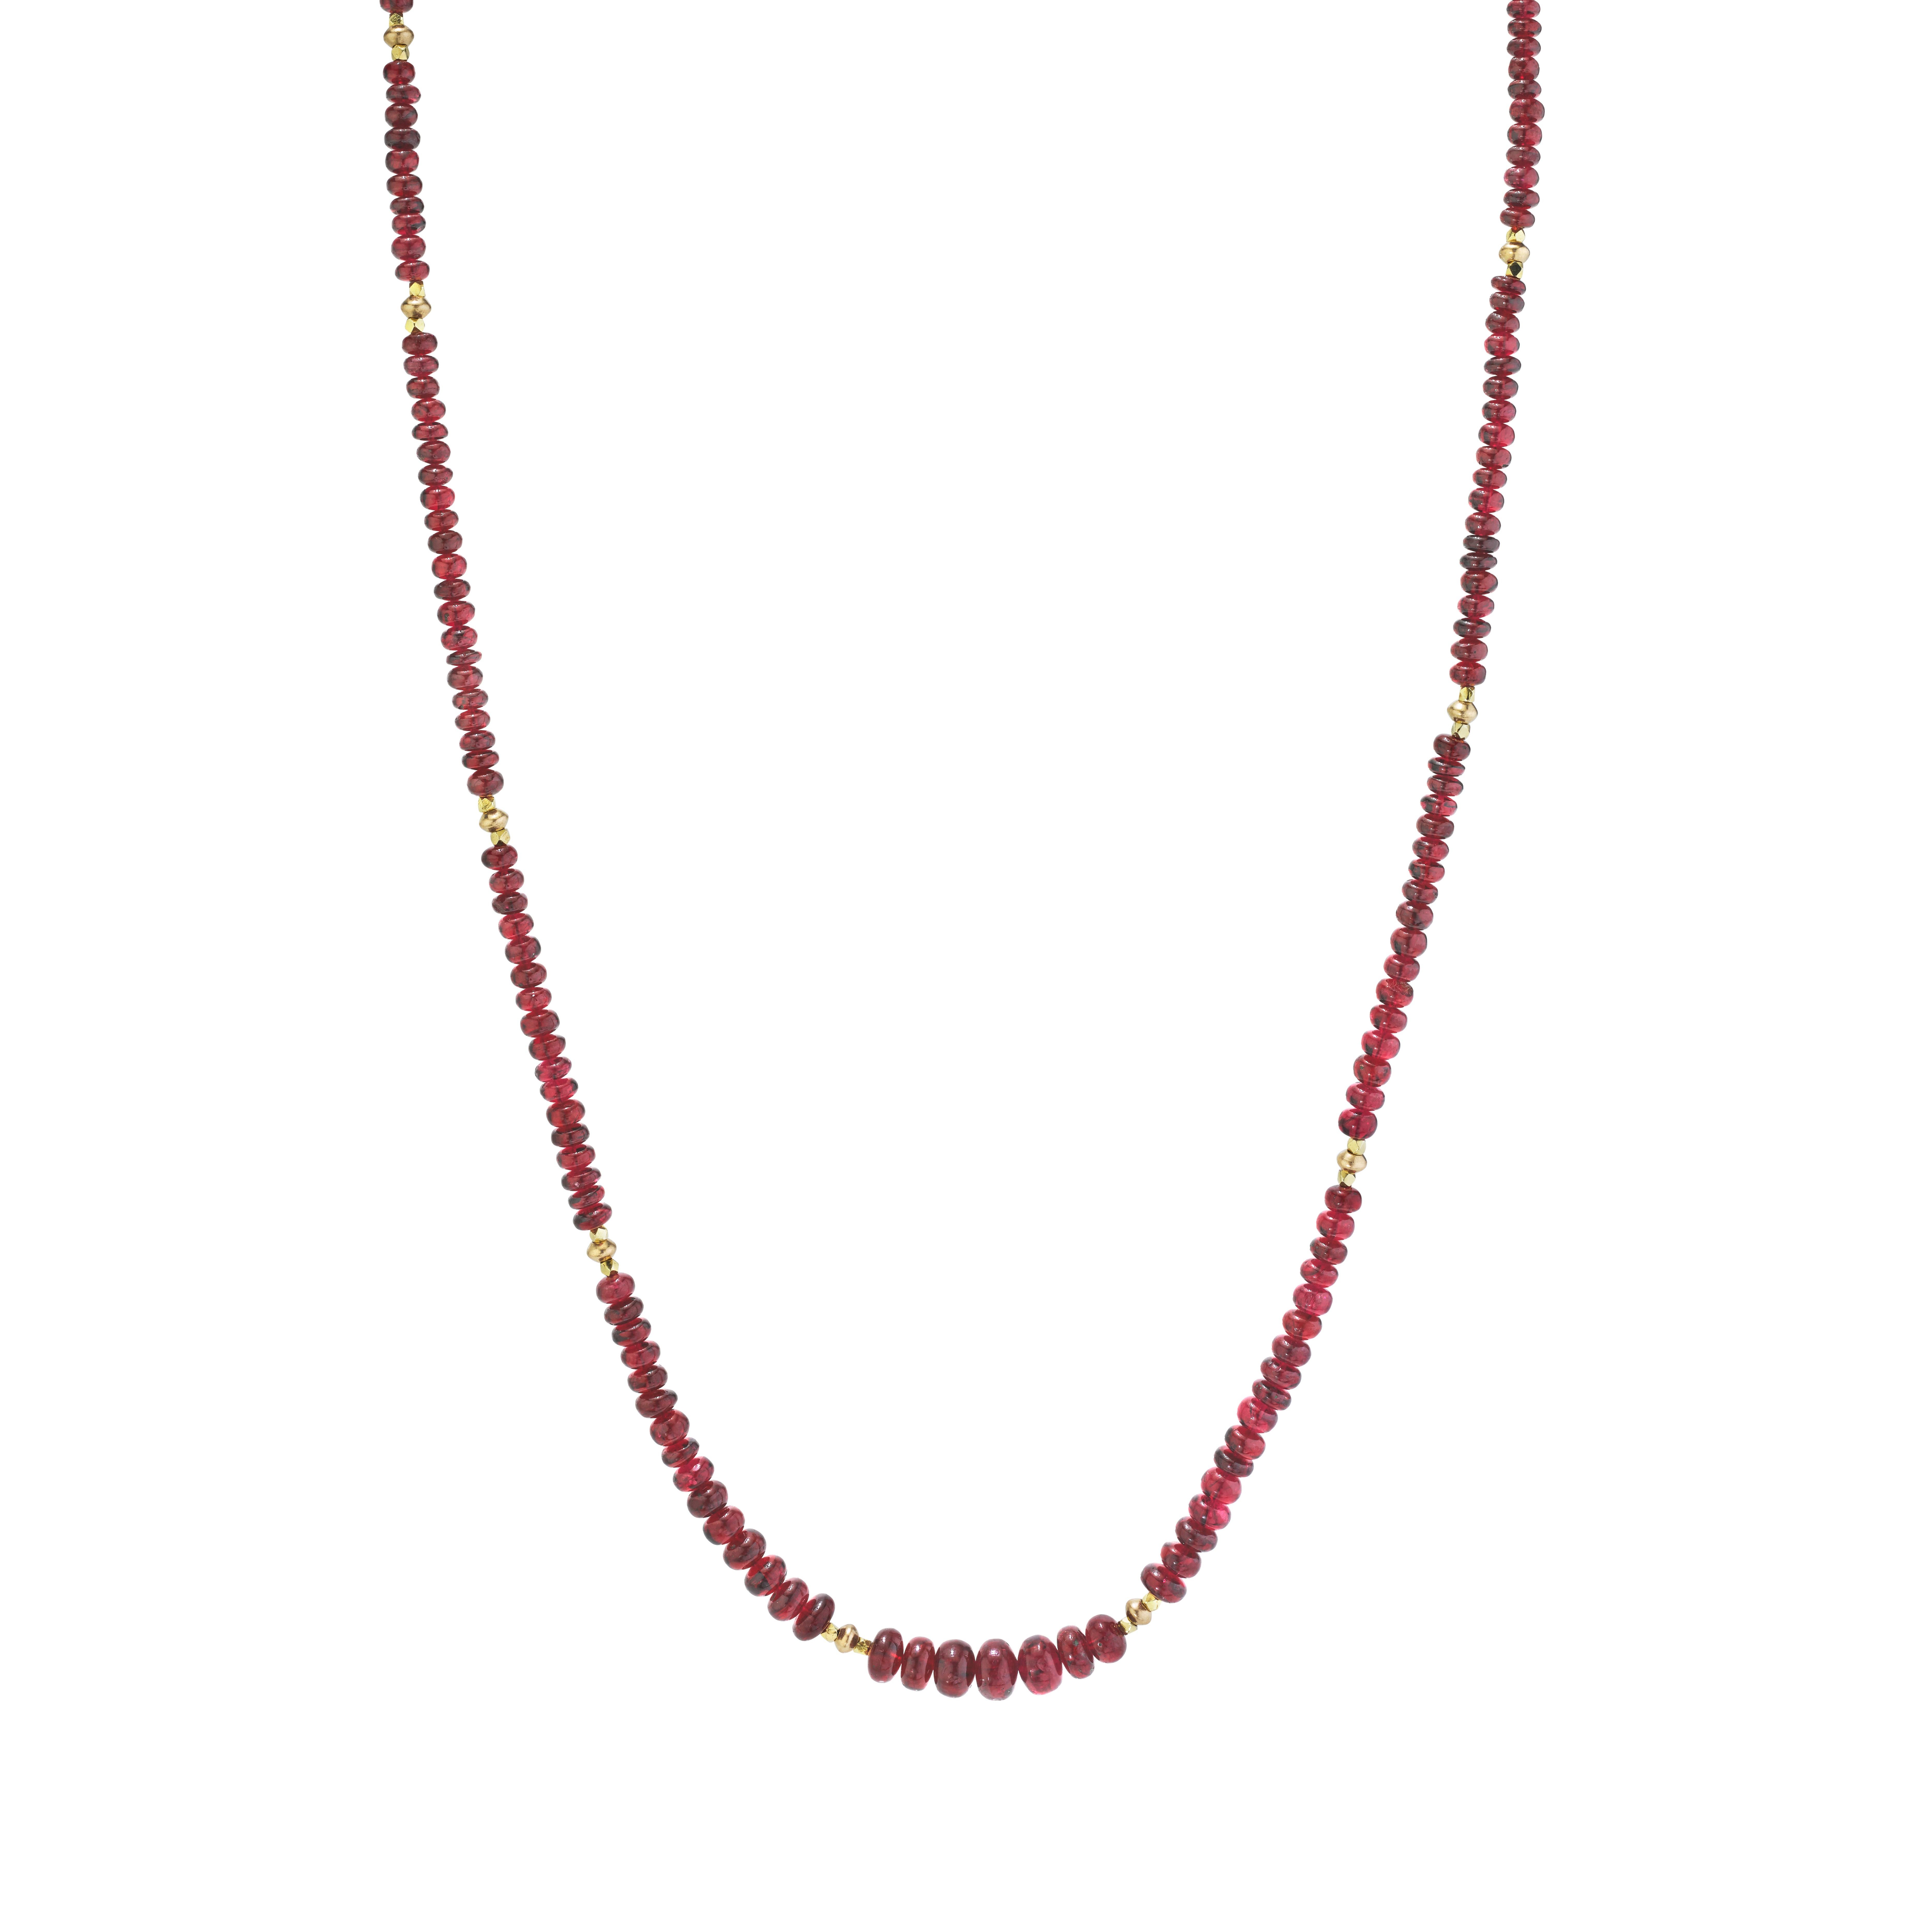 This strand of fine quality spinel beads would be at home in a 19th century ballroom or a 21st century boardroom! Rich, pomegranate red oval rondelles have been hand strung with 22k yellow gold spacers and an 18k yellow gold clasp in an elegant